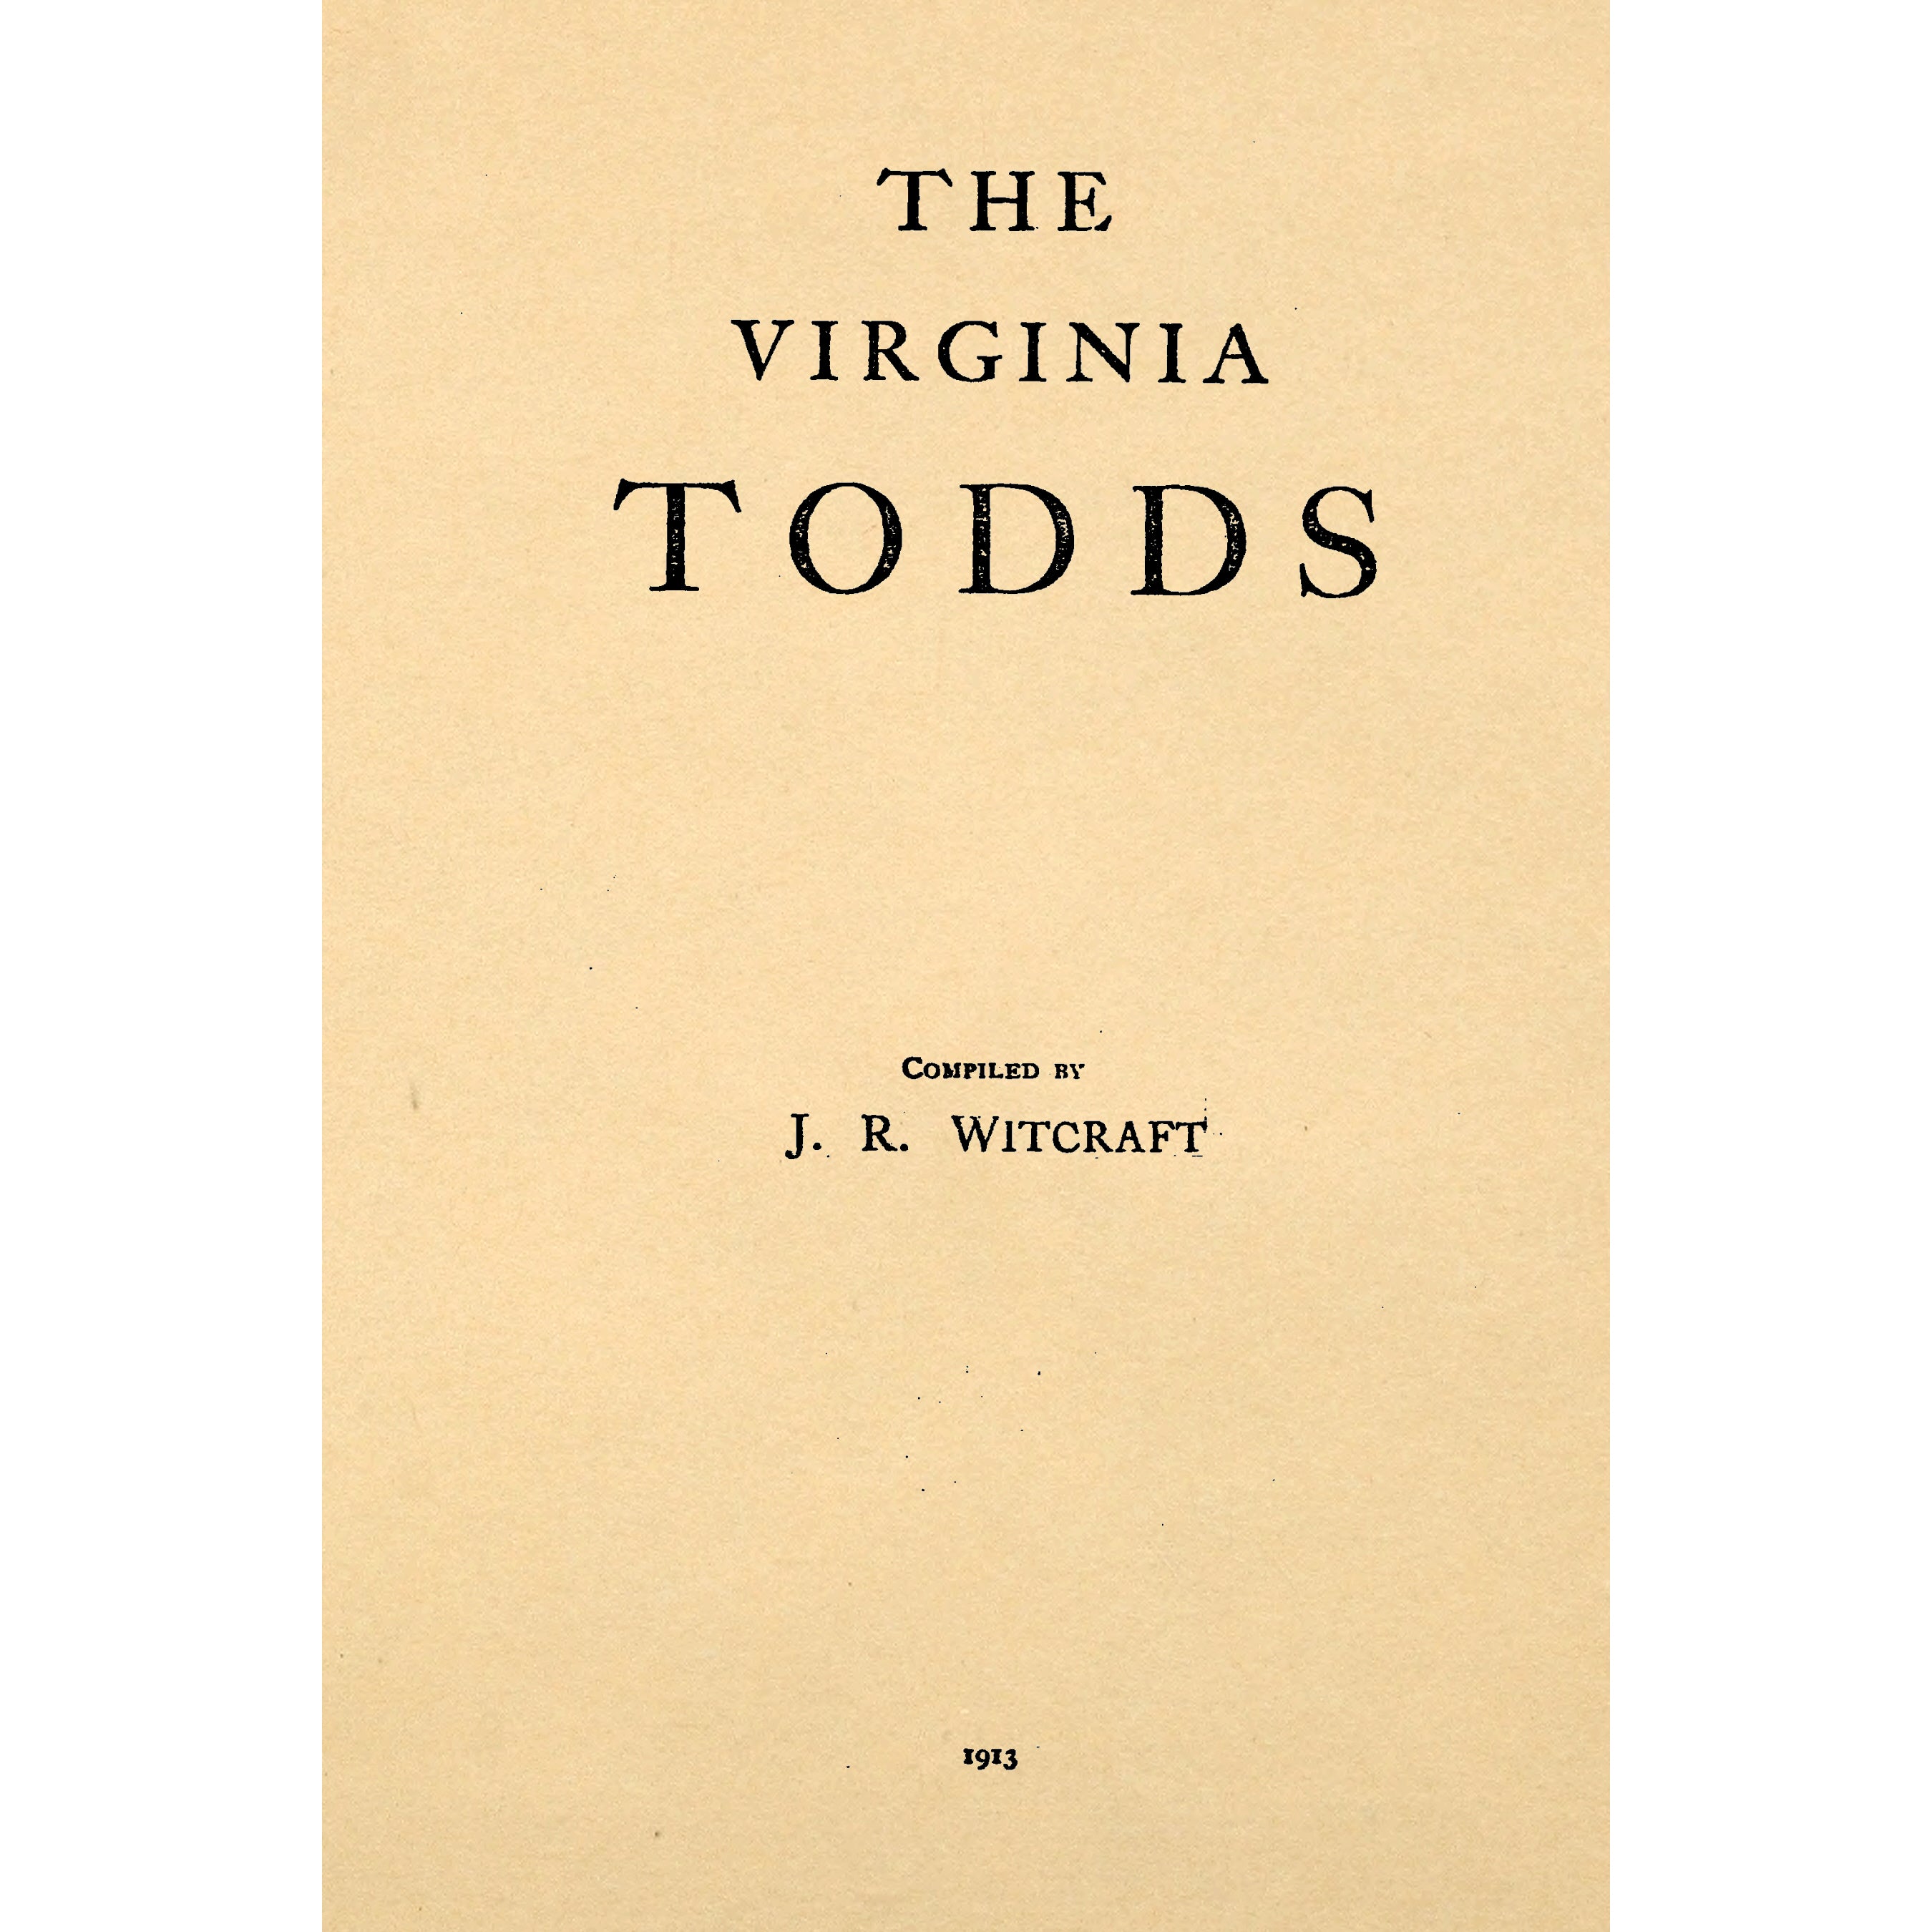 The Virginia Todds